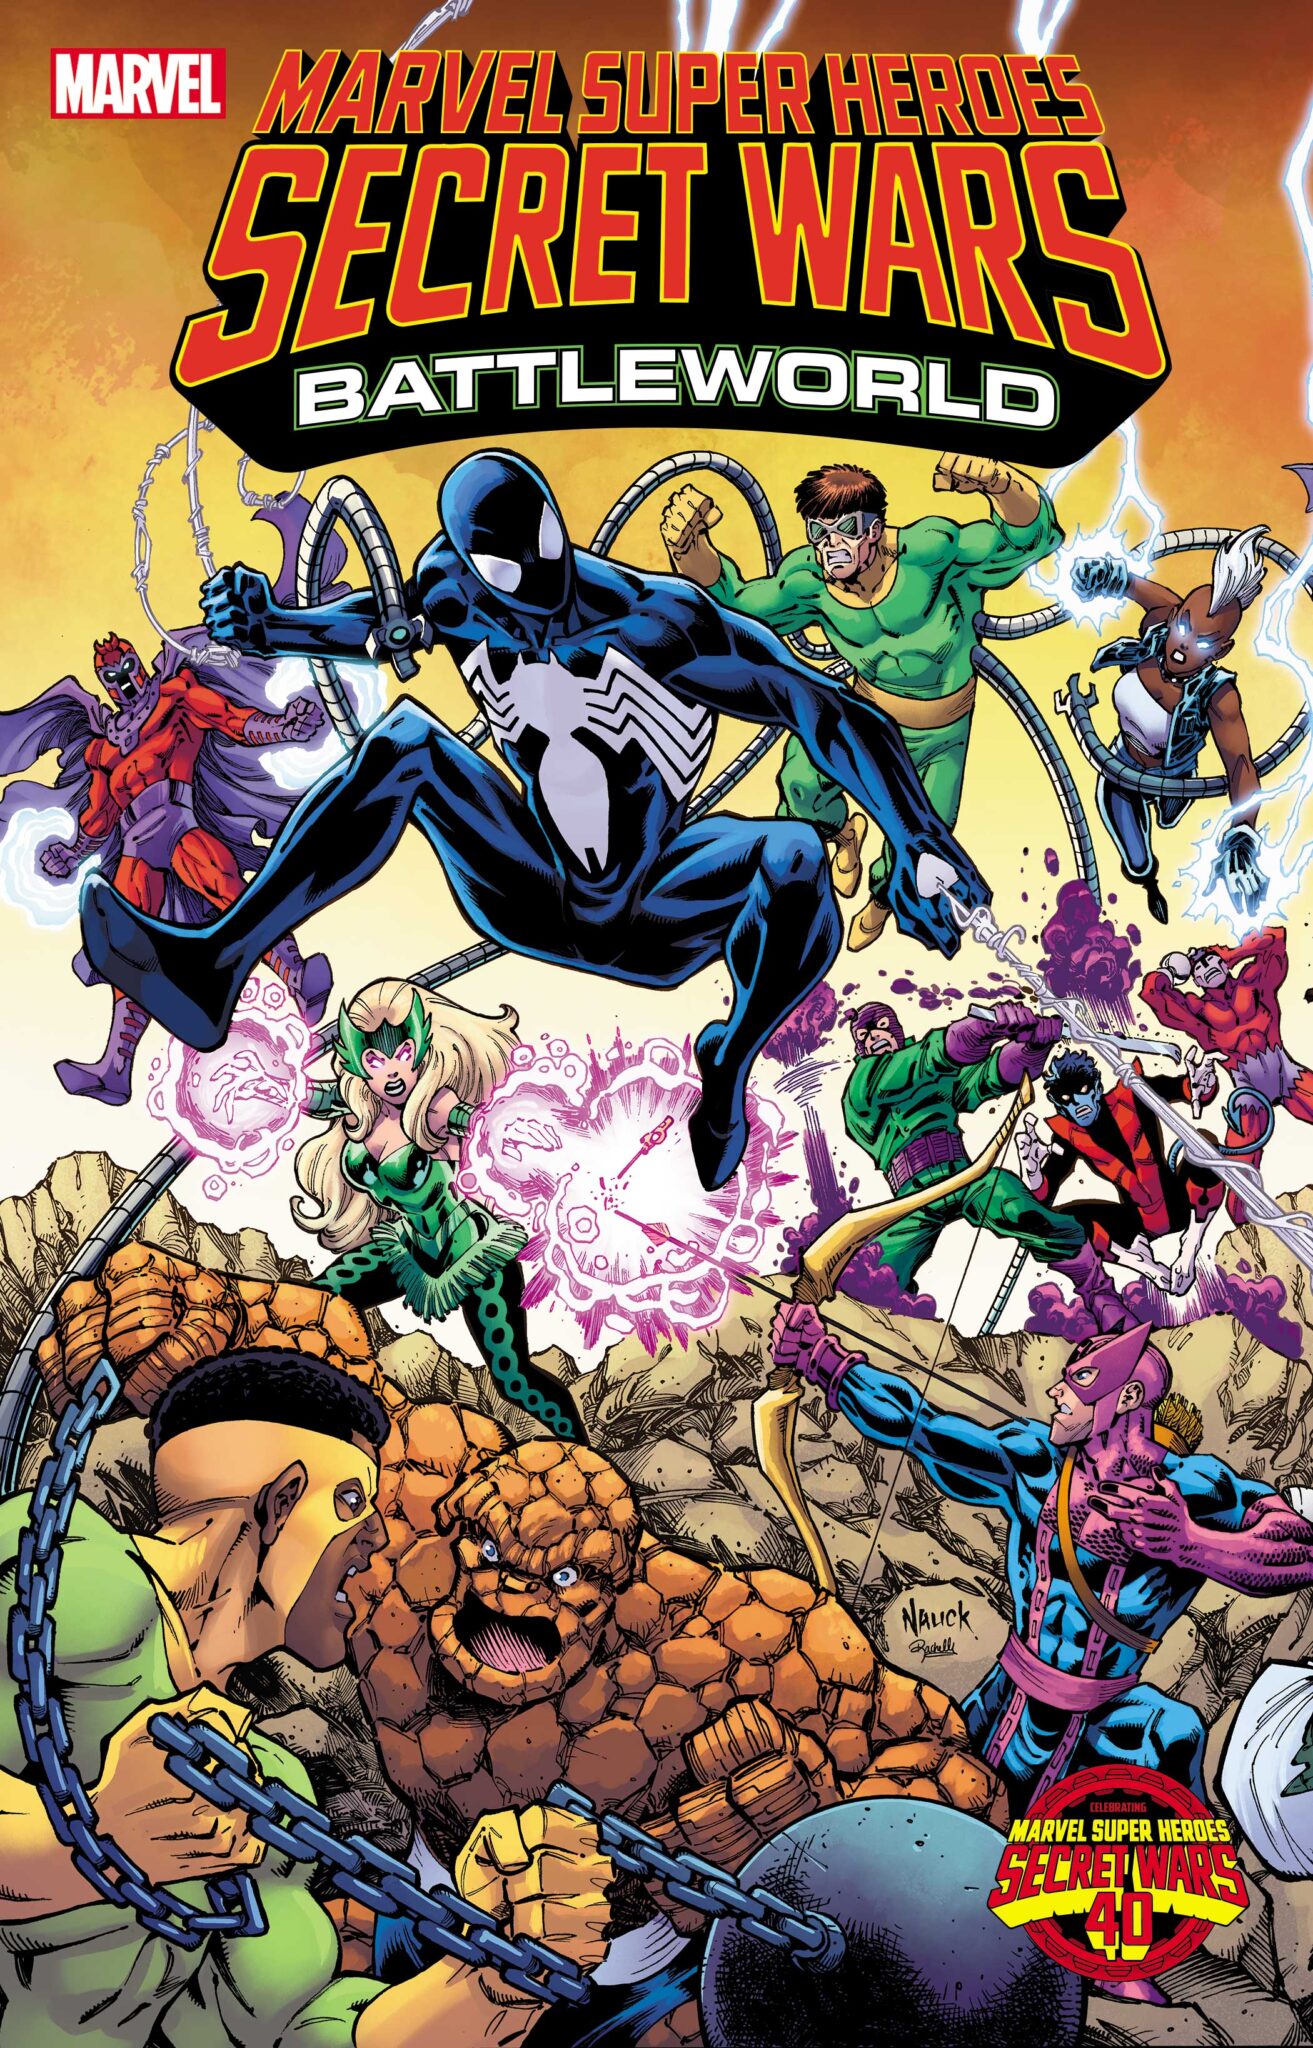 Secret Wars Battleworld Connecting Variant Imbricate by TODD NAUCK